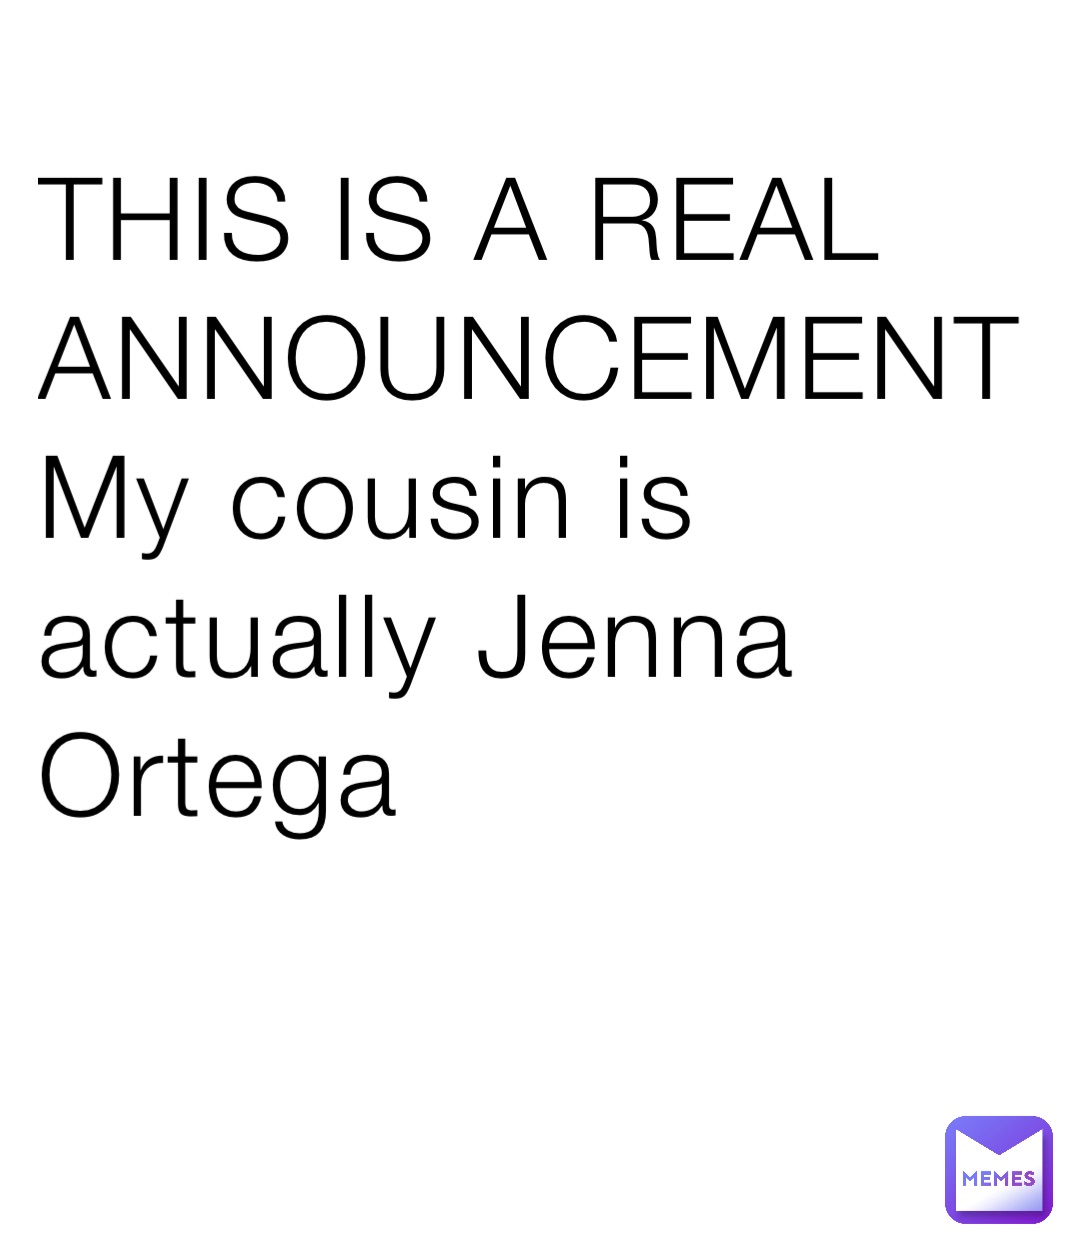 THIS IS A REAL ANNOUNCEMENT 
My cousin is actually Jenna Ortega